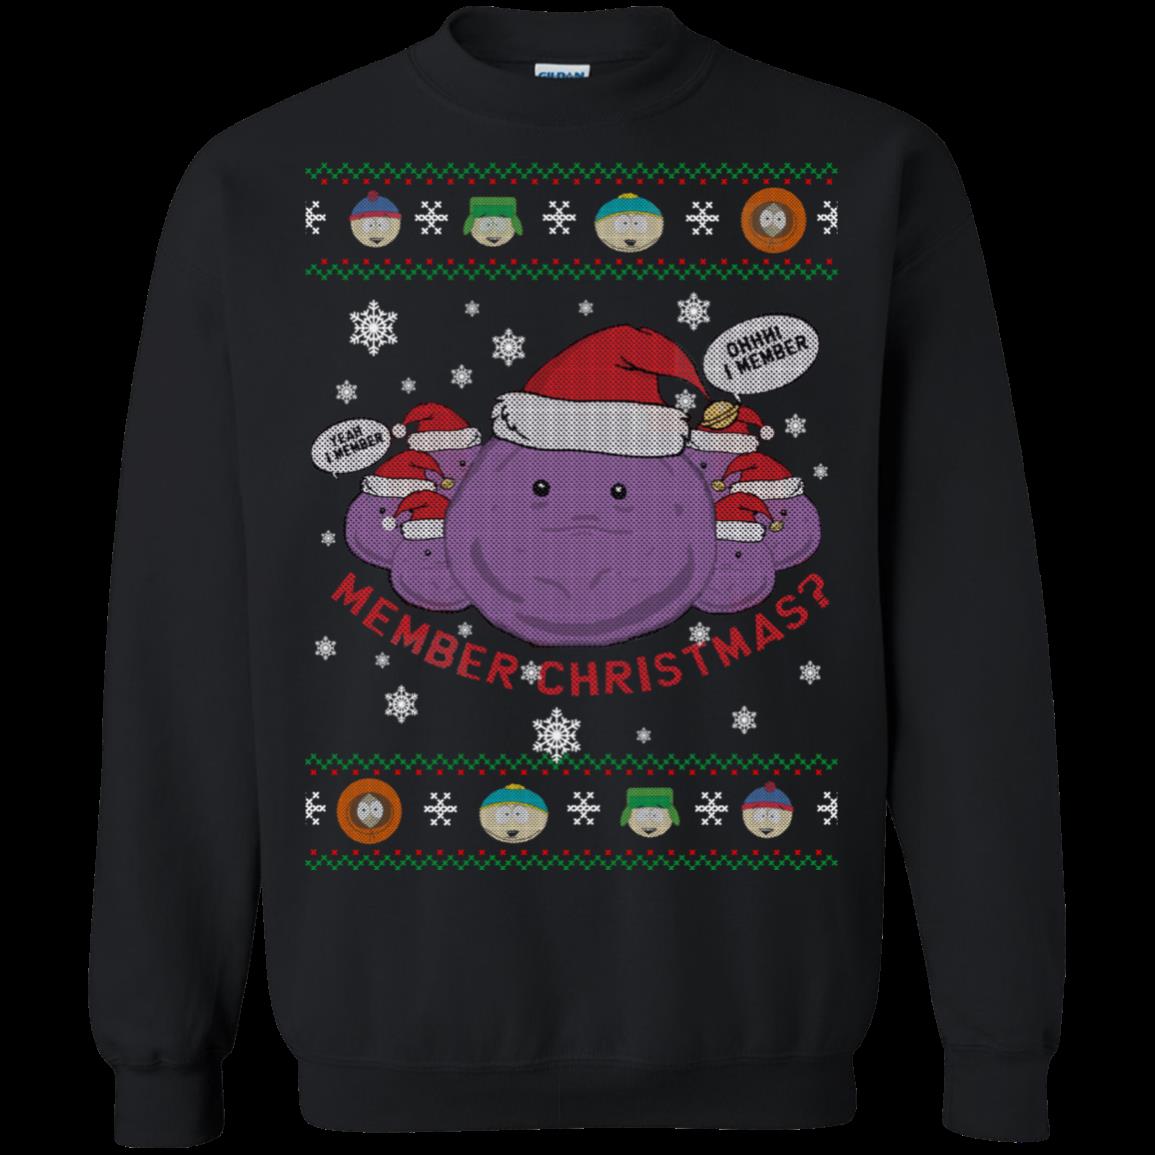 South Park Member Berries Ugly Christmas Sweater Shirts